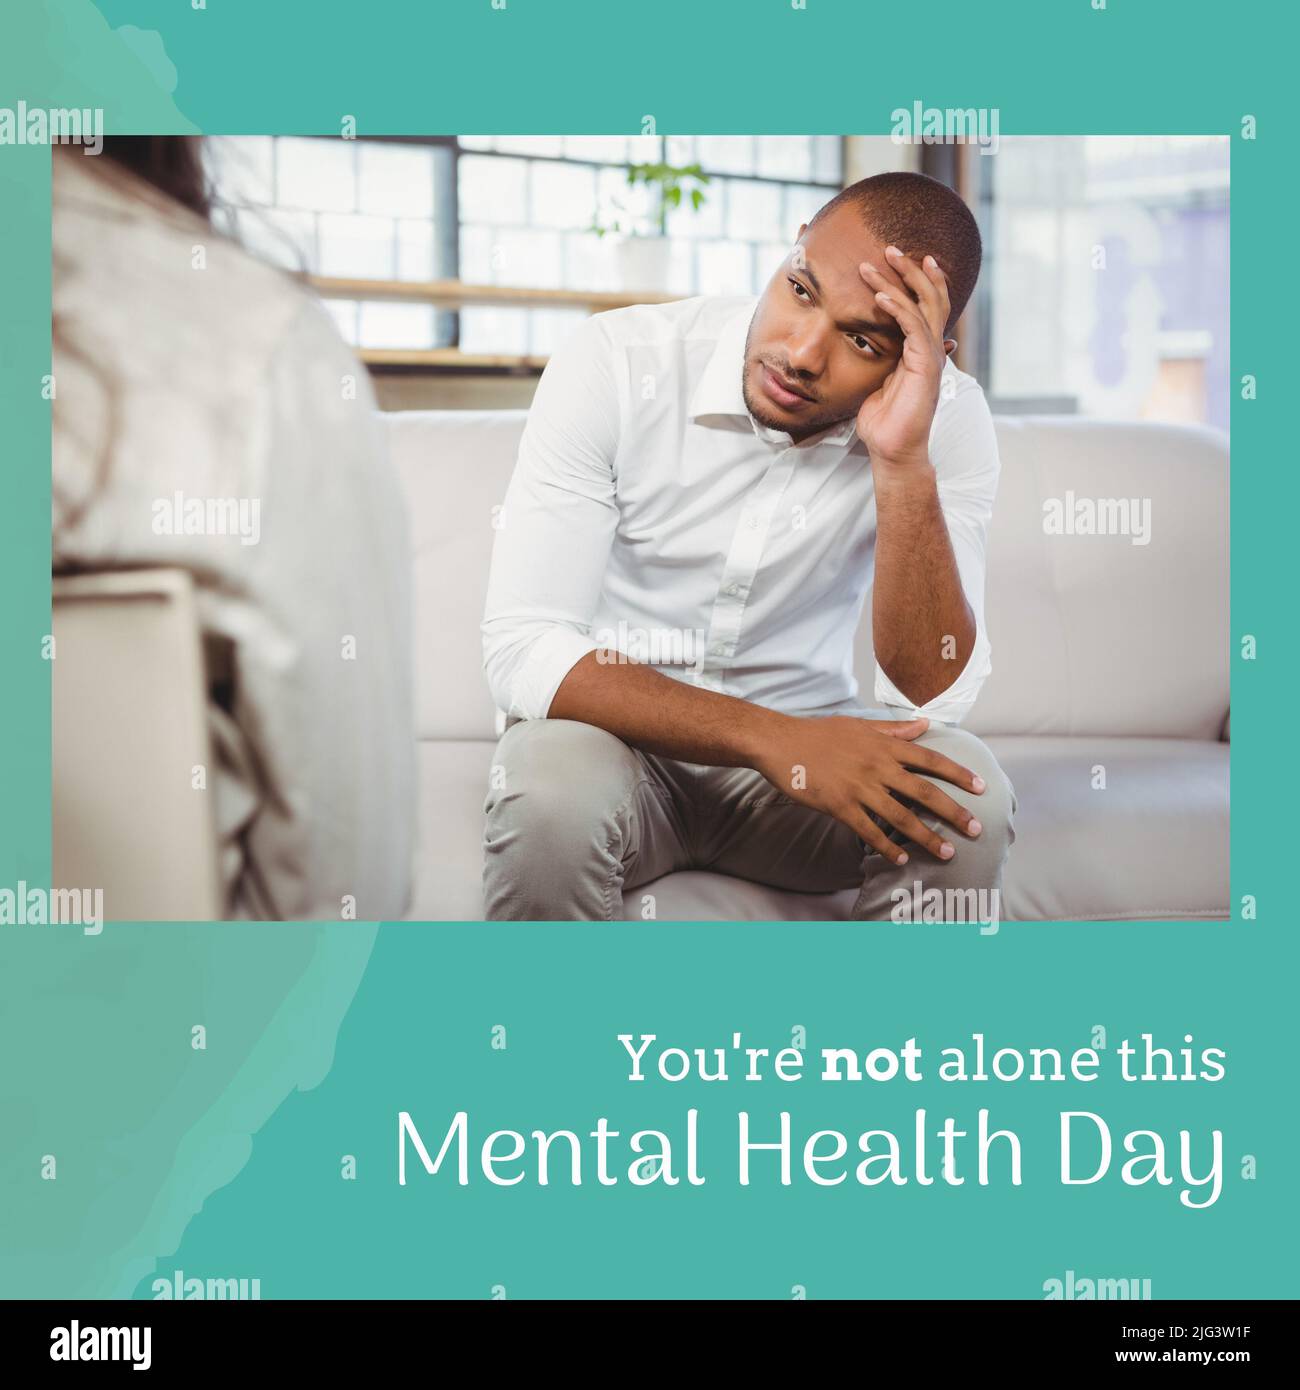 Image of mental health day and diverse psychologist and male patient Stock Photo